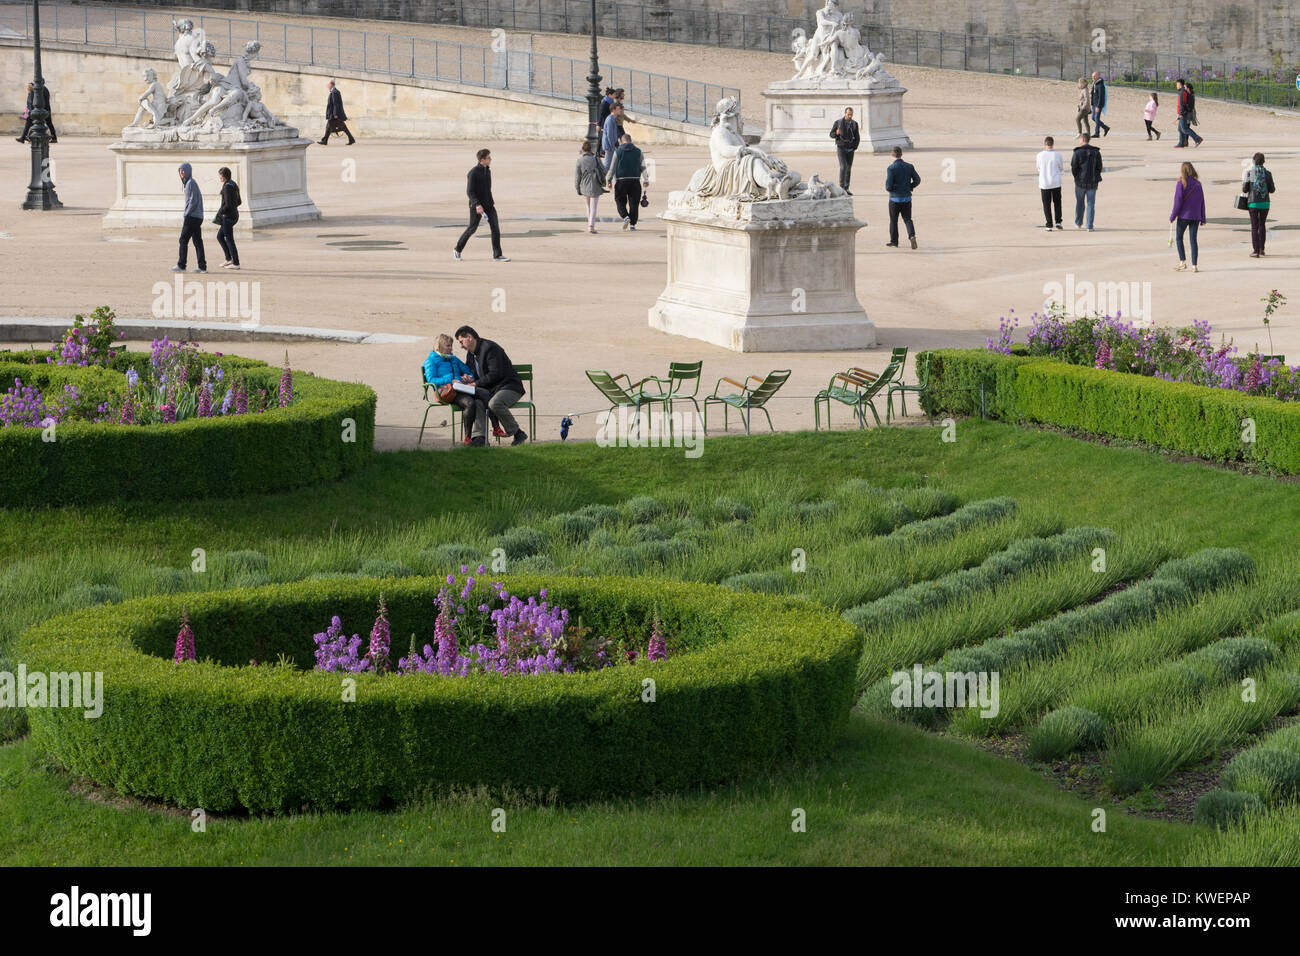 France, Paris, Couple sitting in Truileries Garden with flowers and greenery Stock Photo